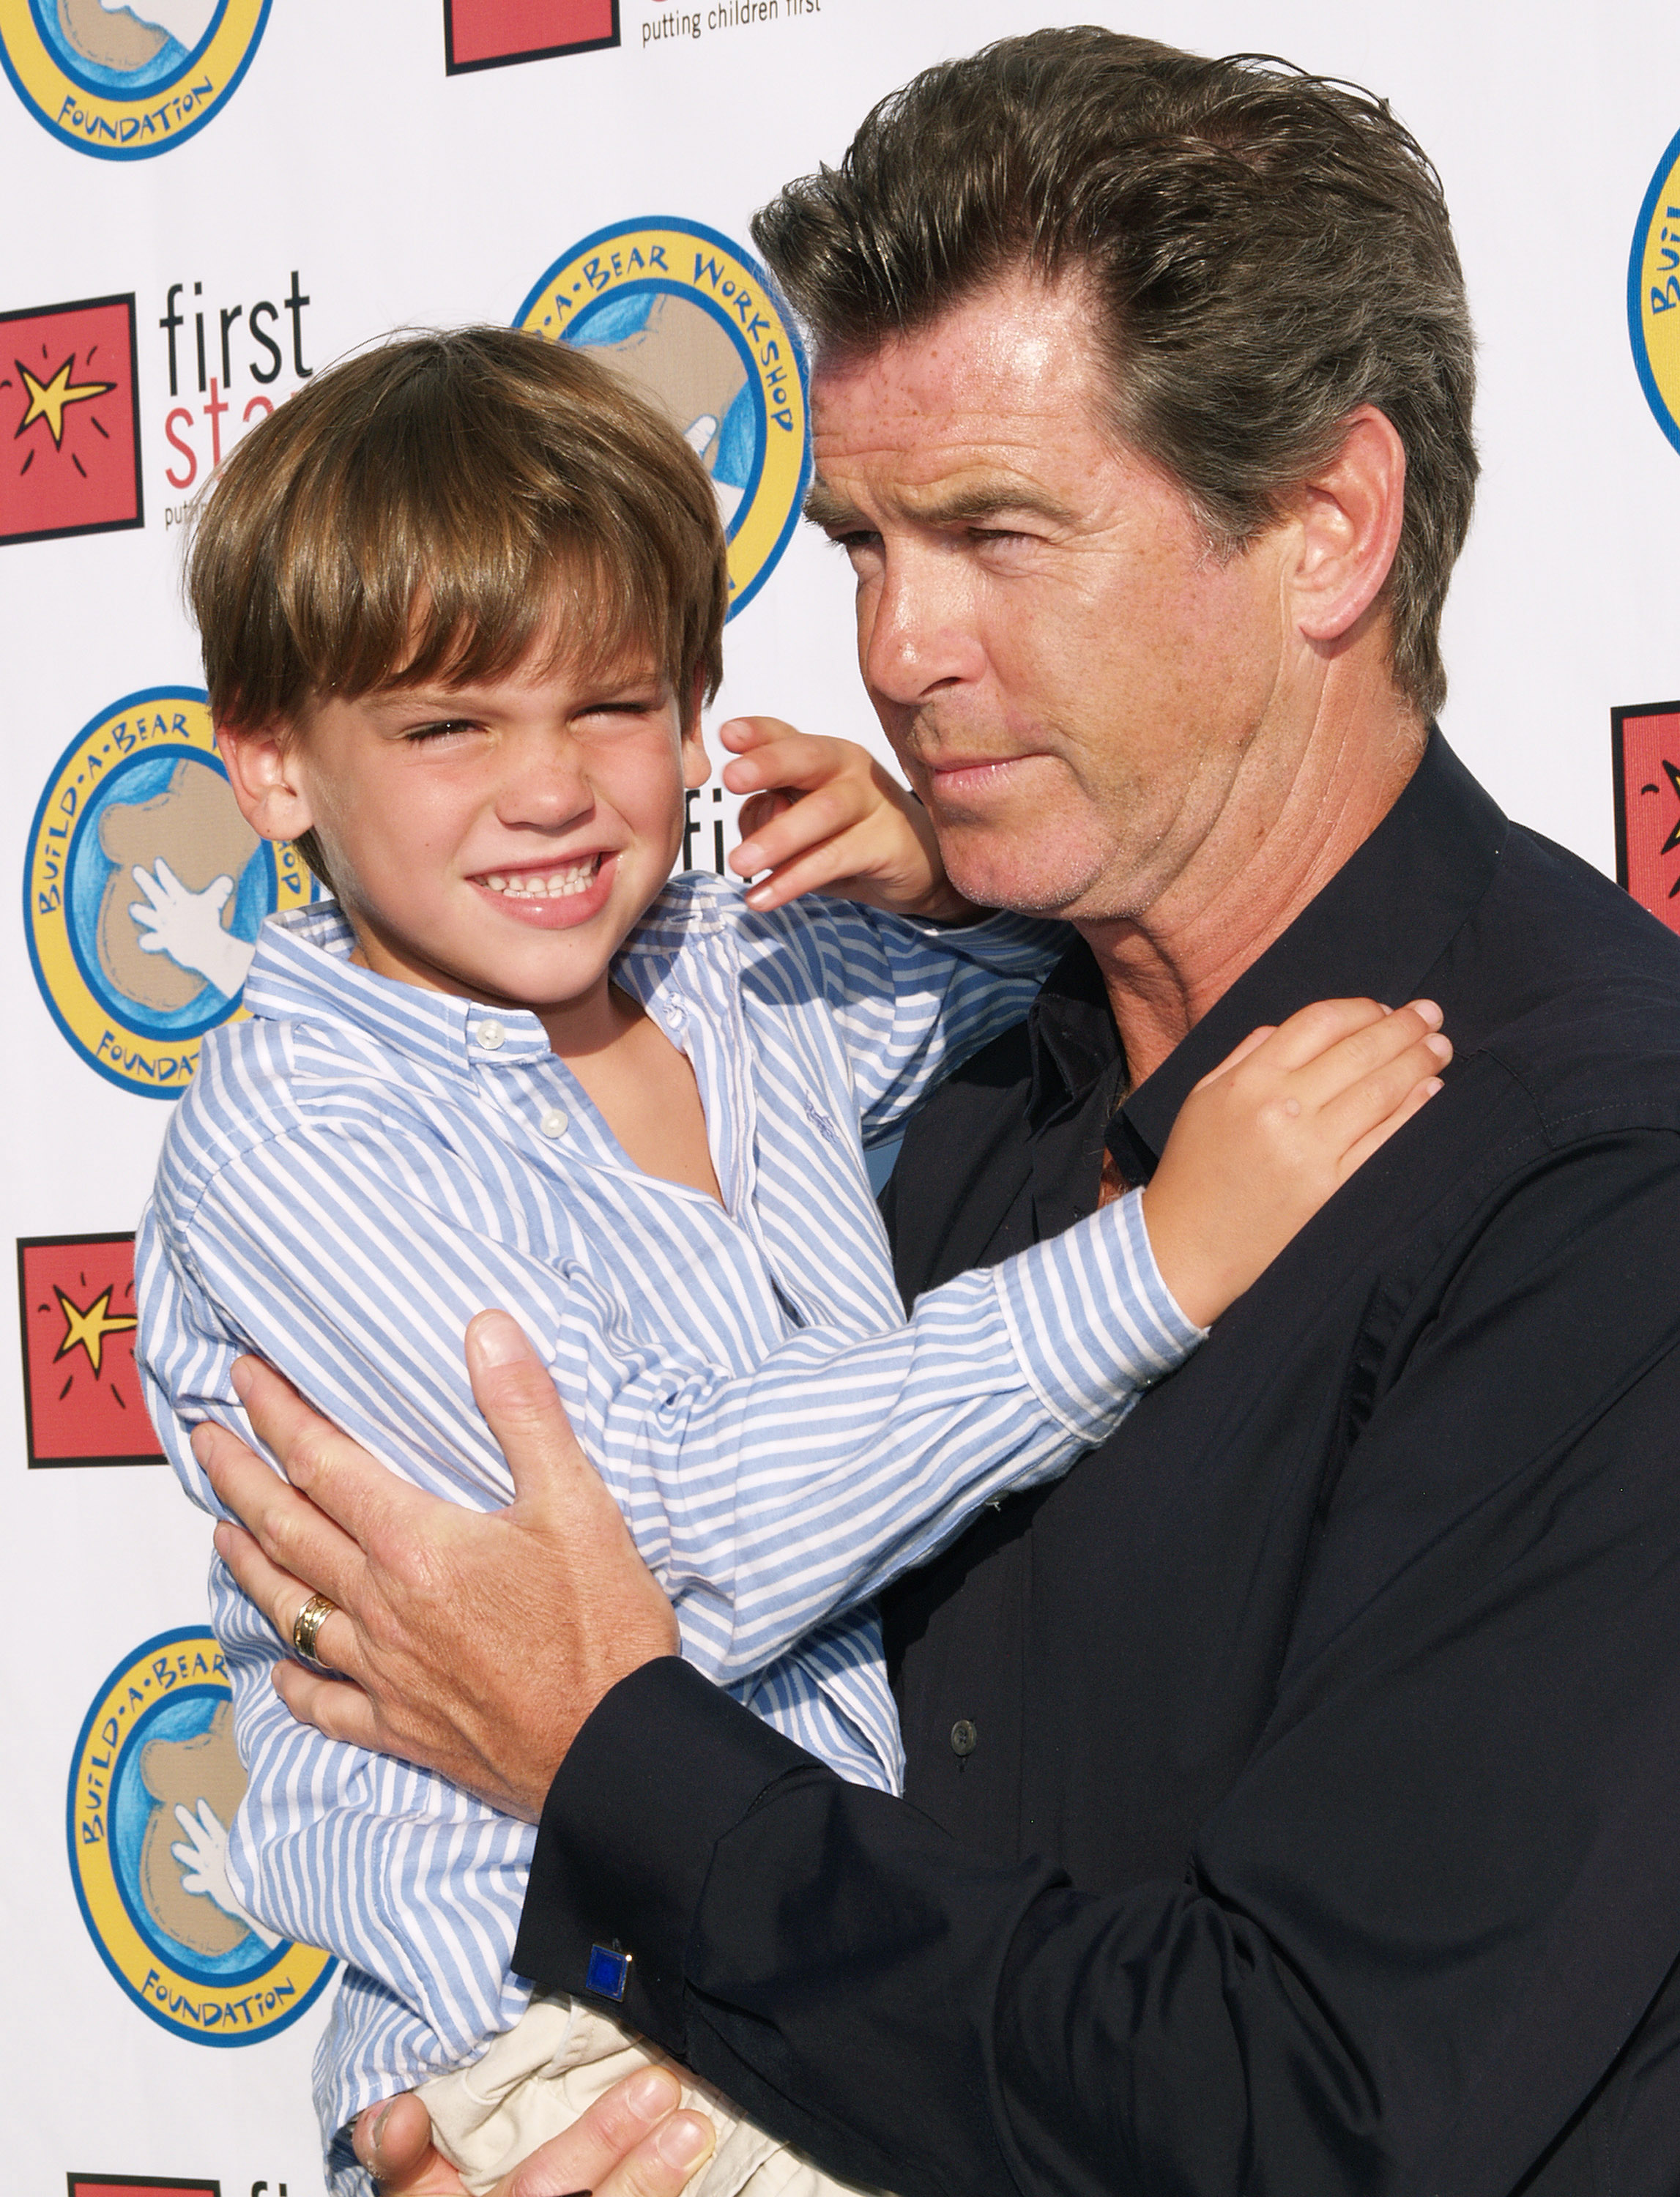 Pierce Brosnan and Paris Brosnan during First Star's "Celebration for Children's Rights" benefit in Santa Monica, California | Source: Getty Images